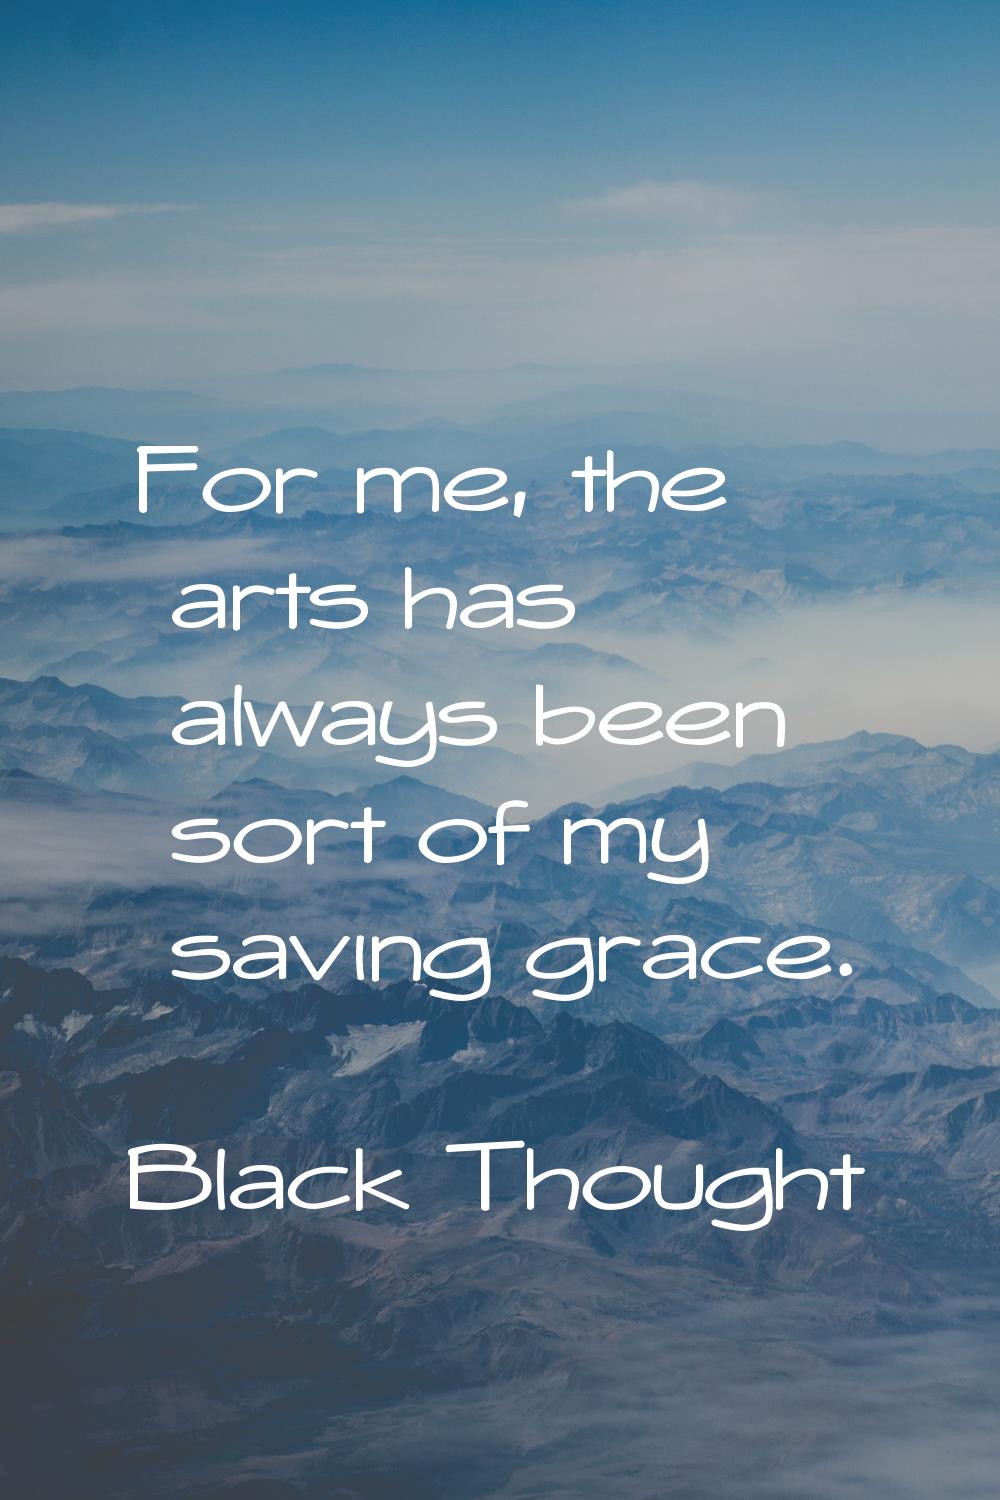 For me, the arts has always been sort of my saving grace.